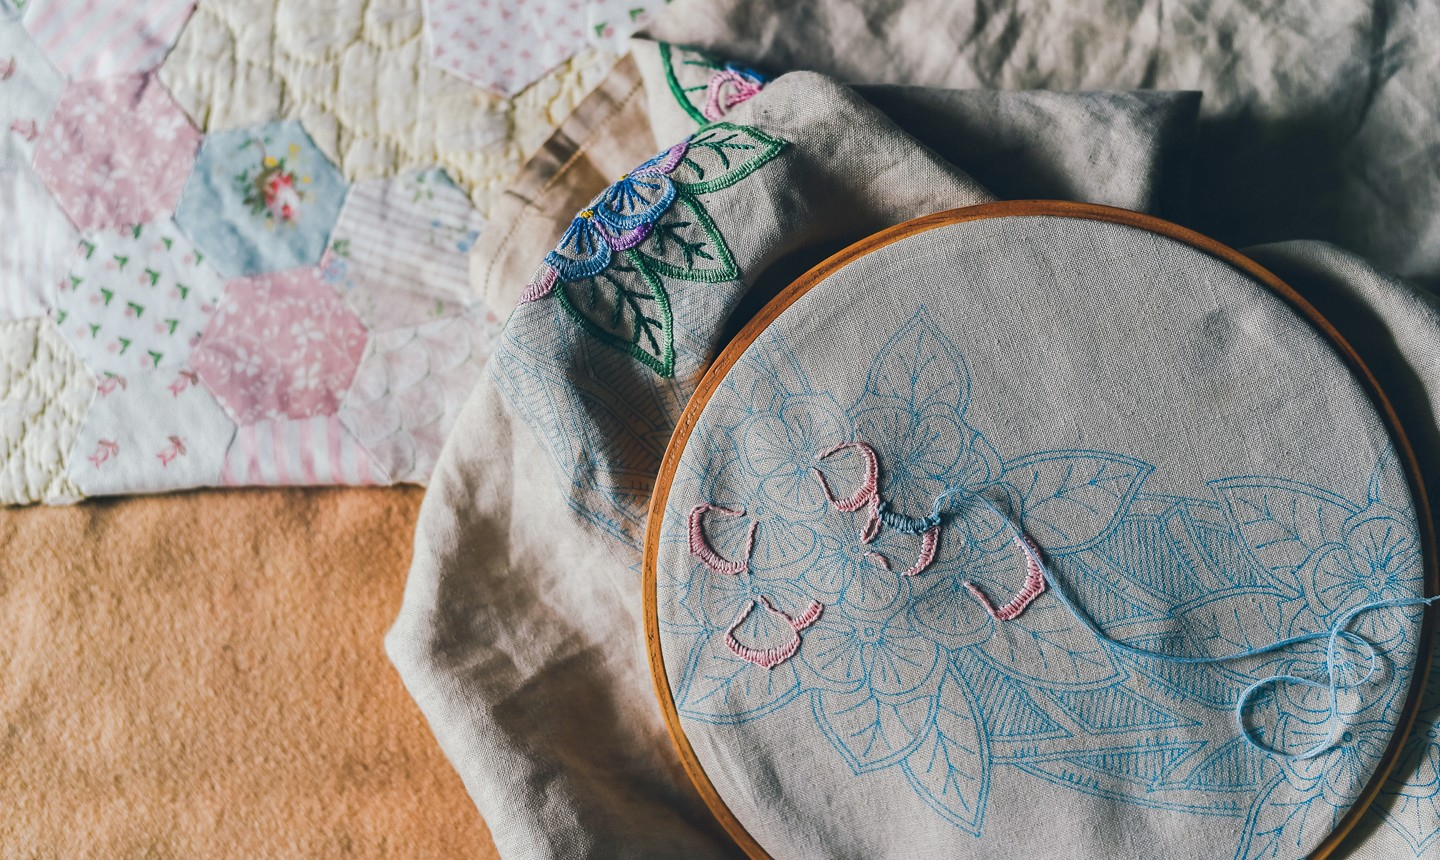 How To Make An Embroidery Pattern 5 Simple Ways To Transfer Embroidery Designs